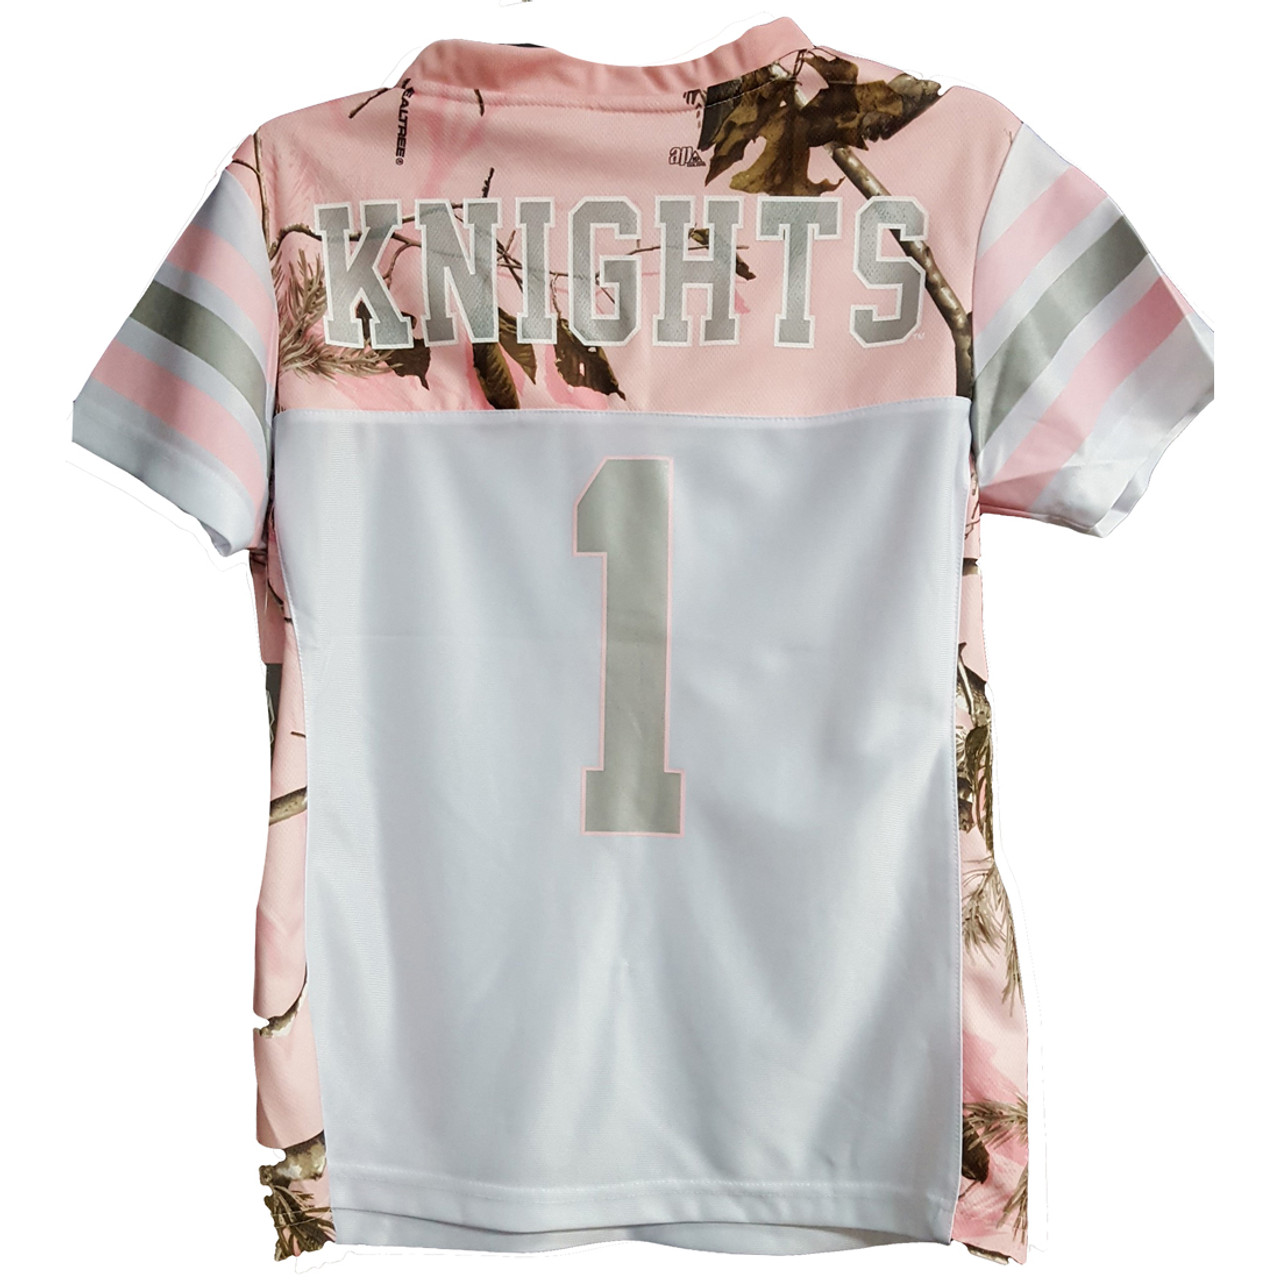 Earthletics Youth Realtree Xtra Camouflage College Football Screen Printed Jersey, UCF, M, Size: Medium, Gray